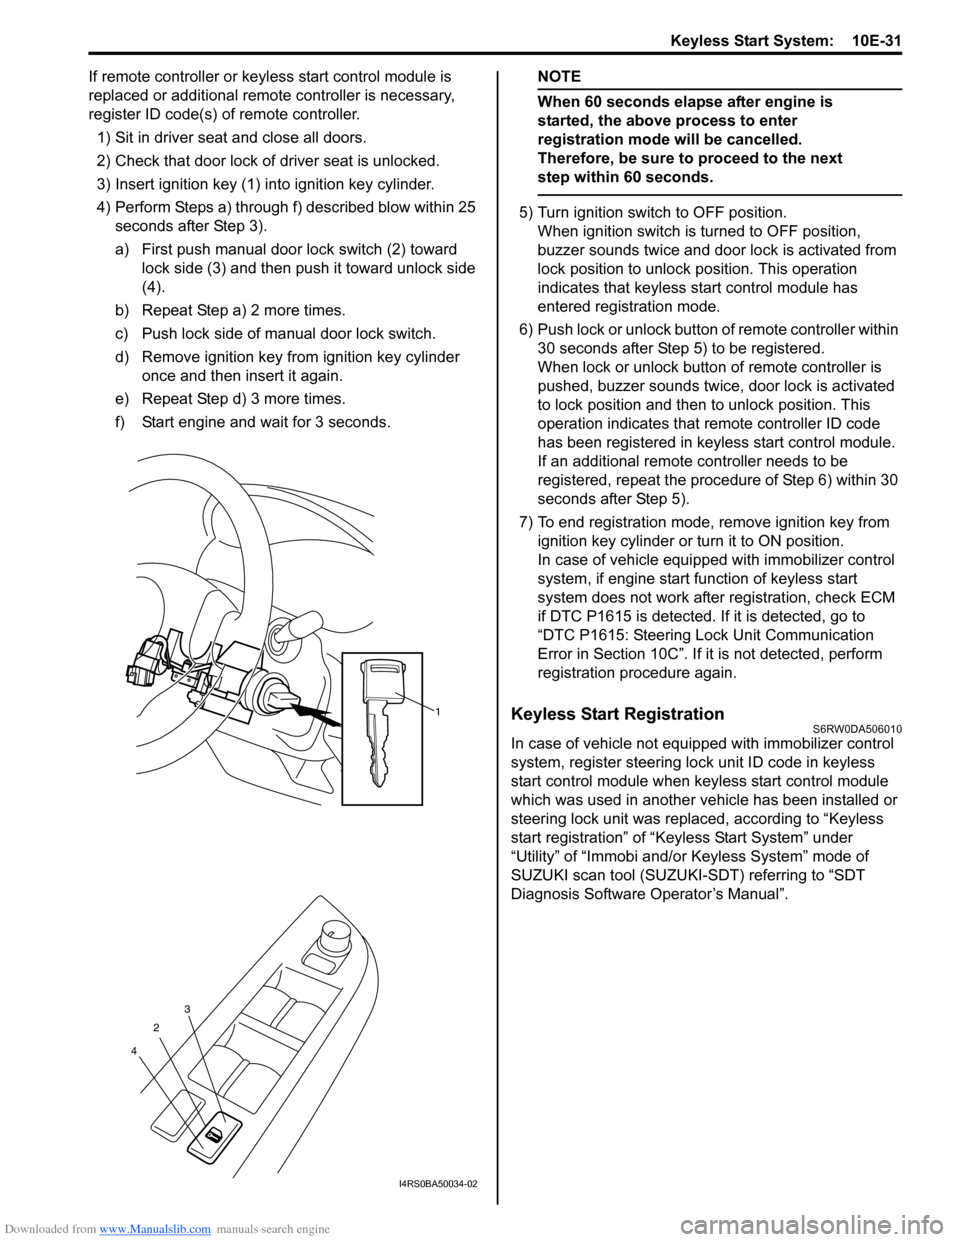 SUZUKI SX4 2006 1.G Service Owners Manual Downloaded from www.Manualslib.com manuals search engine Keyless Start System:  10E-31
If remote controller or keyless start control module is 
replaced or additional remote controller is necessary, 
